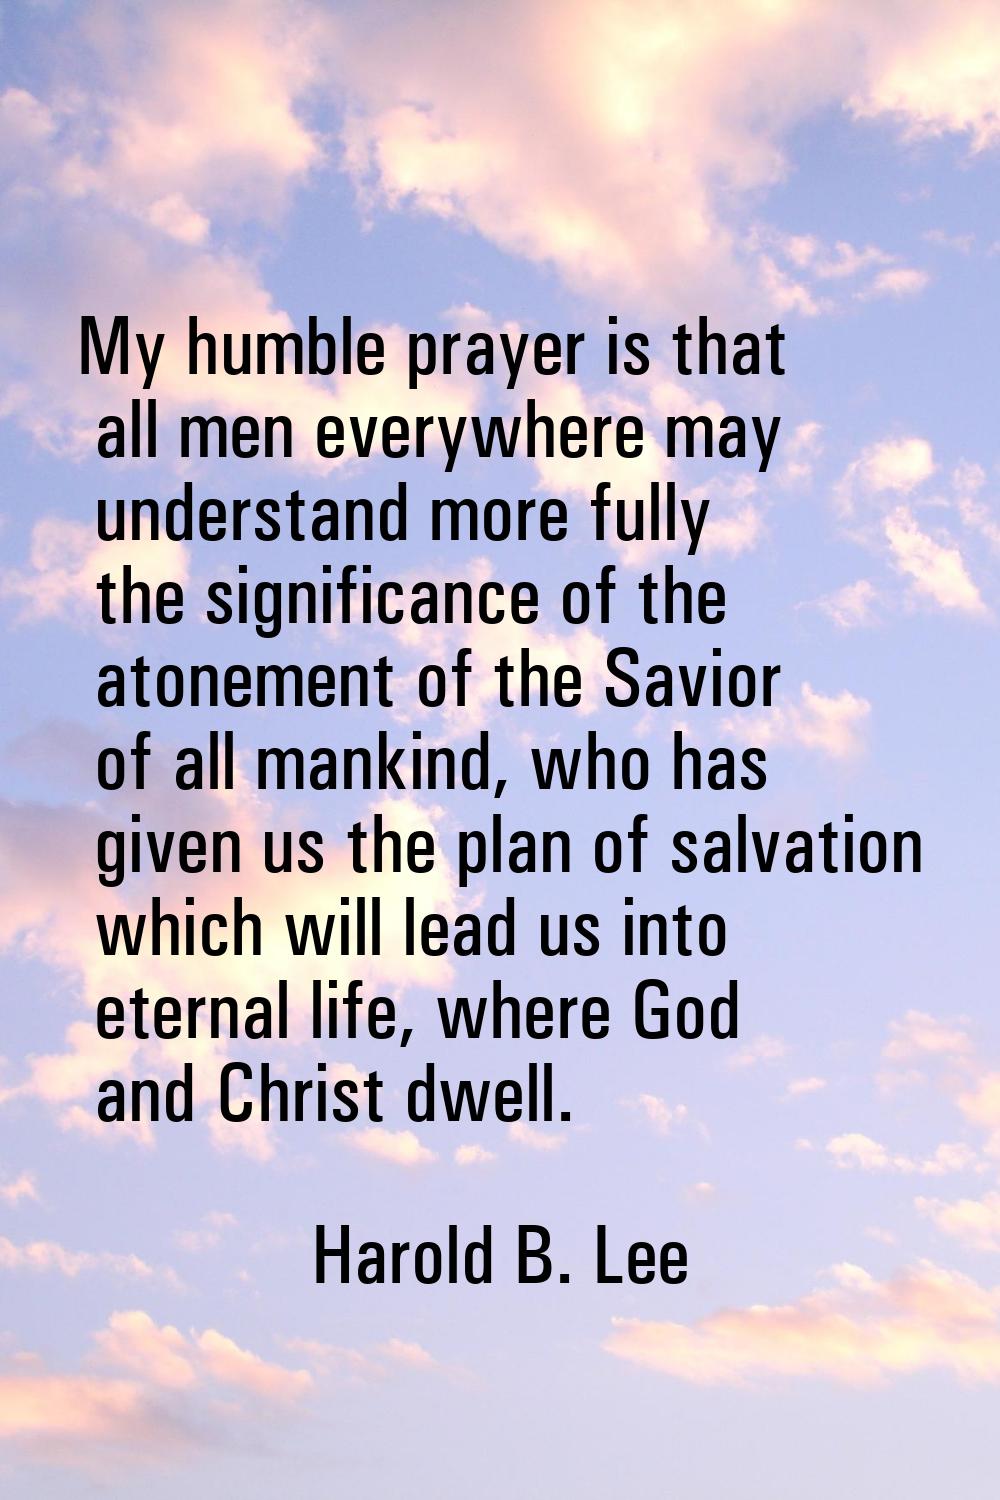 My humble prayer is that all men everywhere may understand more fully the significance of the atone